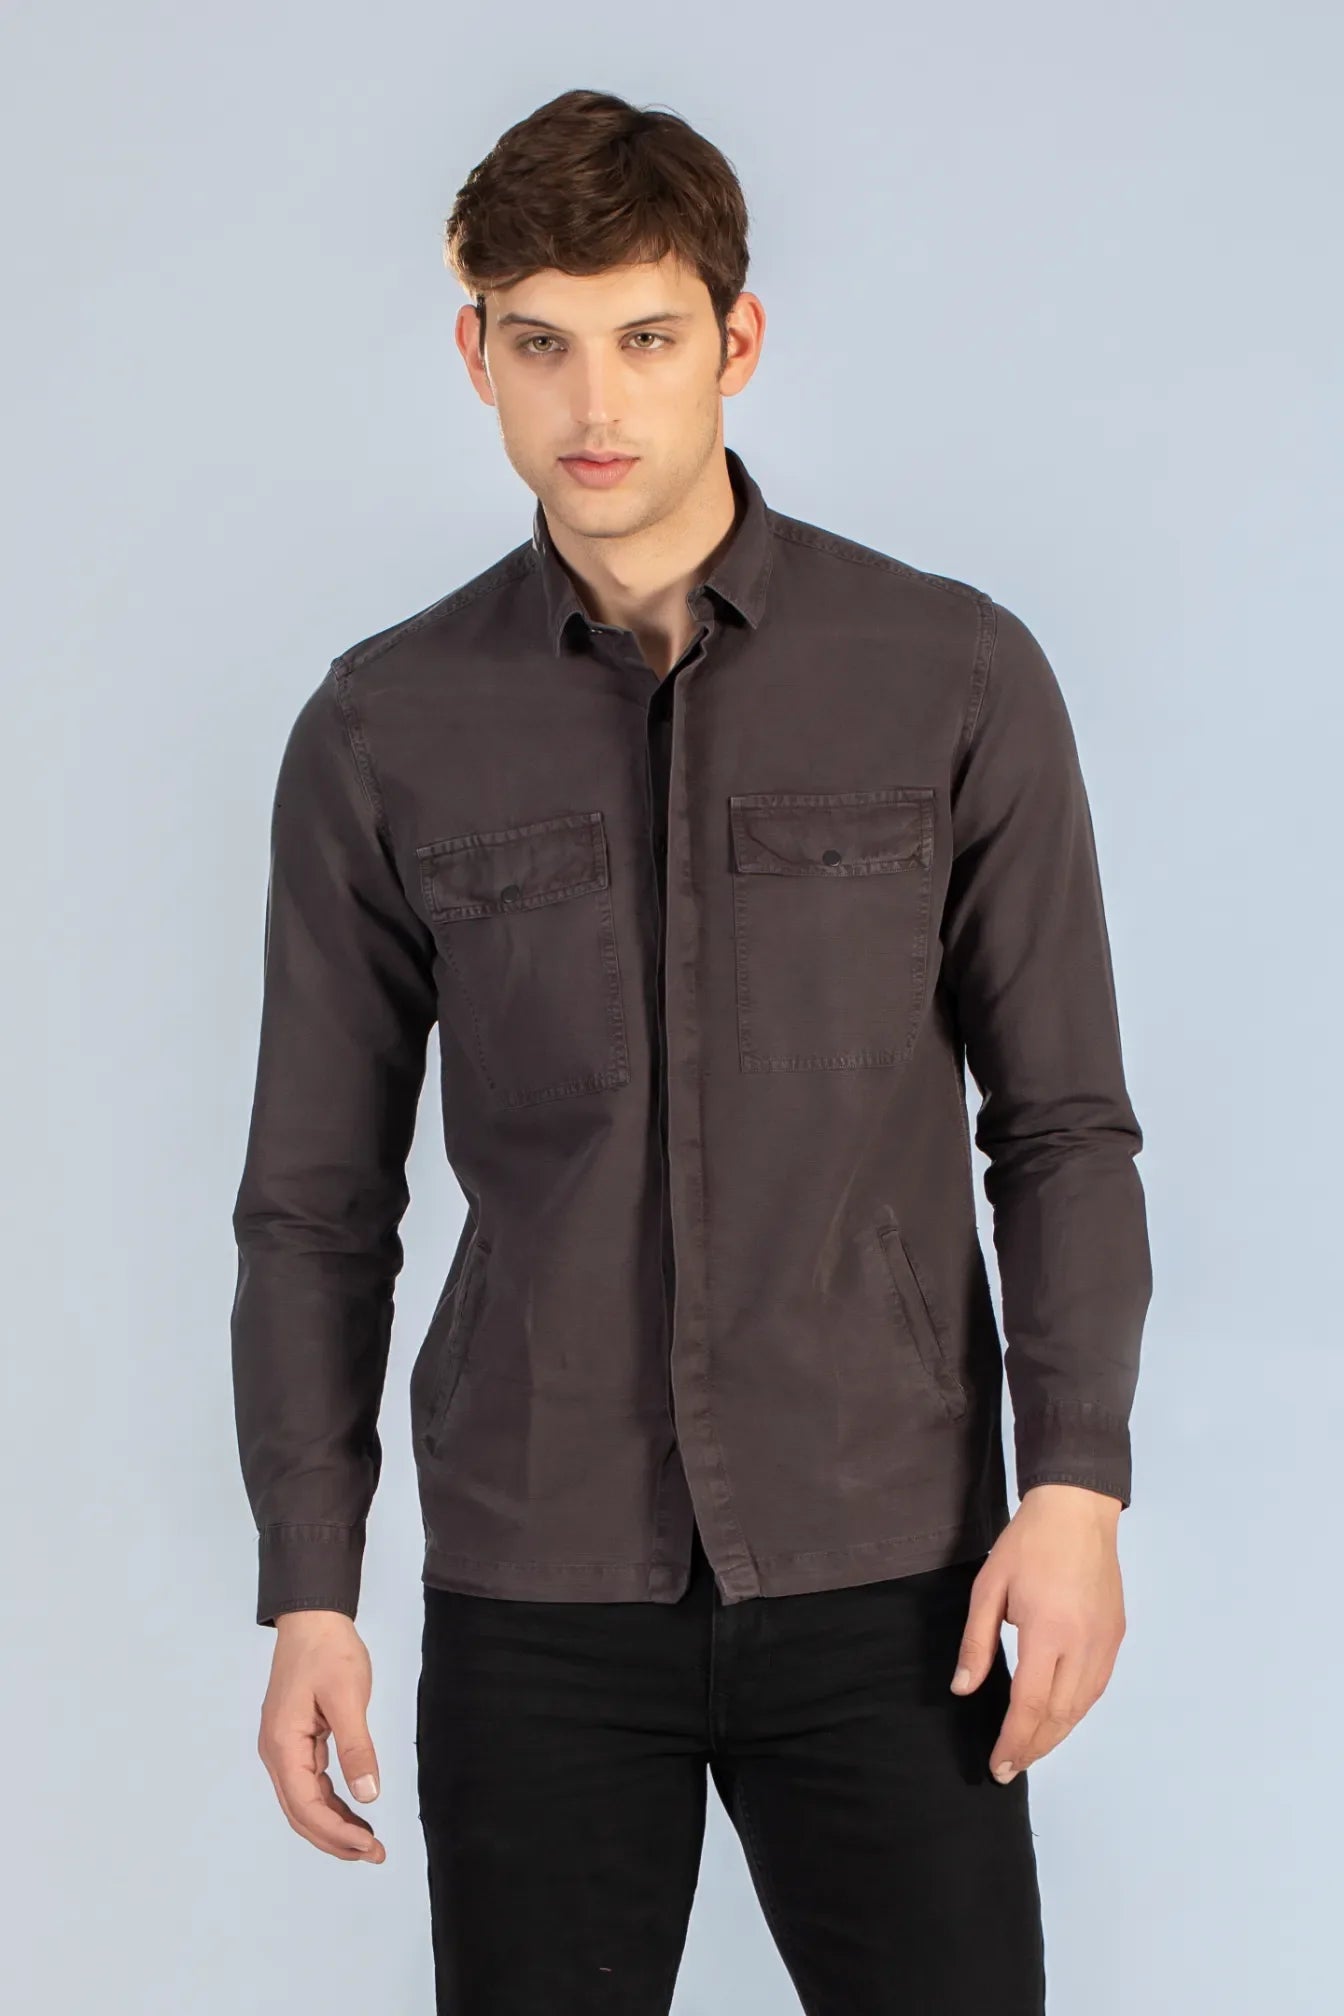 Buy Over-Dyed Double  Pocket Shirt Online.